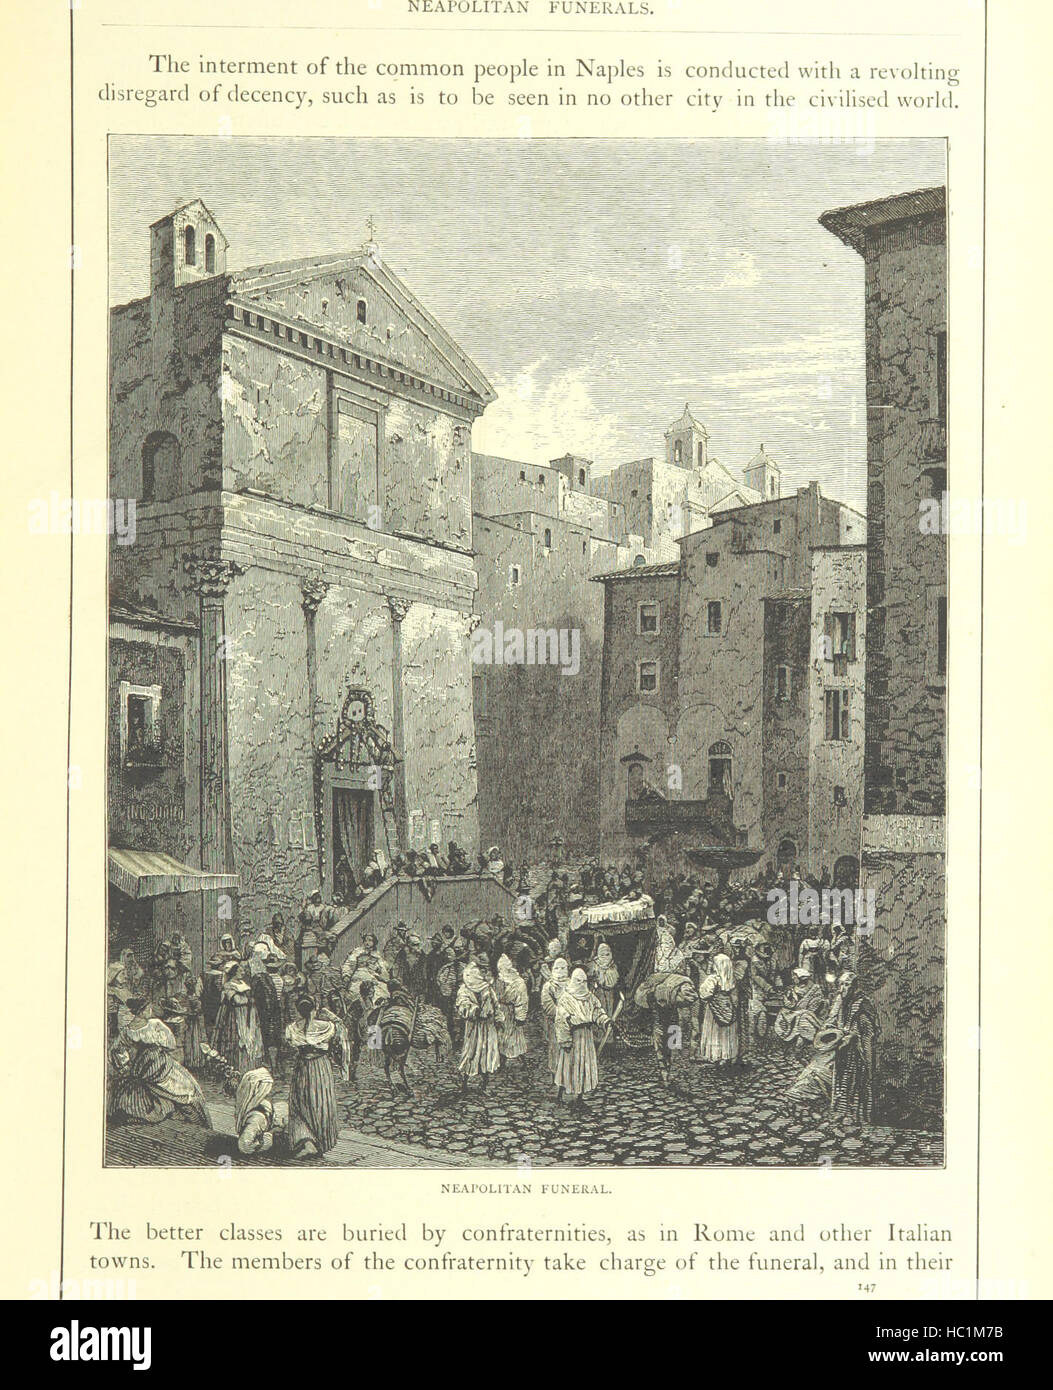 Image taken from page 153 of 'Italian Pictures. Drawn with Pen and Pencil. By the Author of “Spanish Pictures,” etc. [Samuel Manning.]' Image taken from page 153 of 'Italian Pictures Drawn with Stock Photo